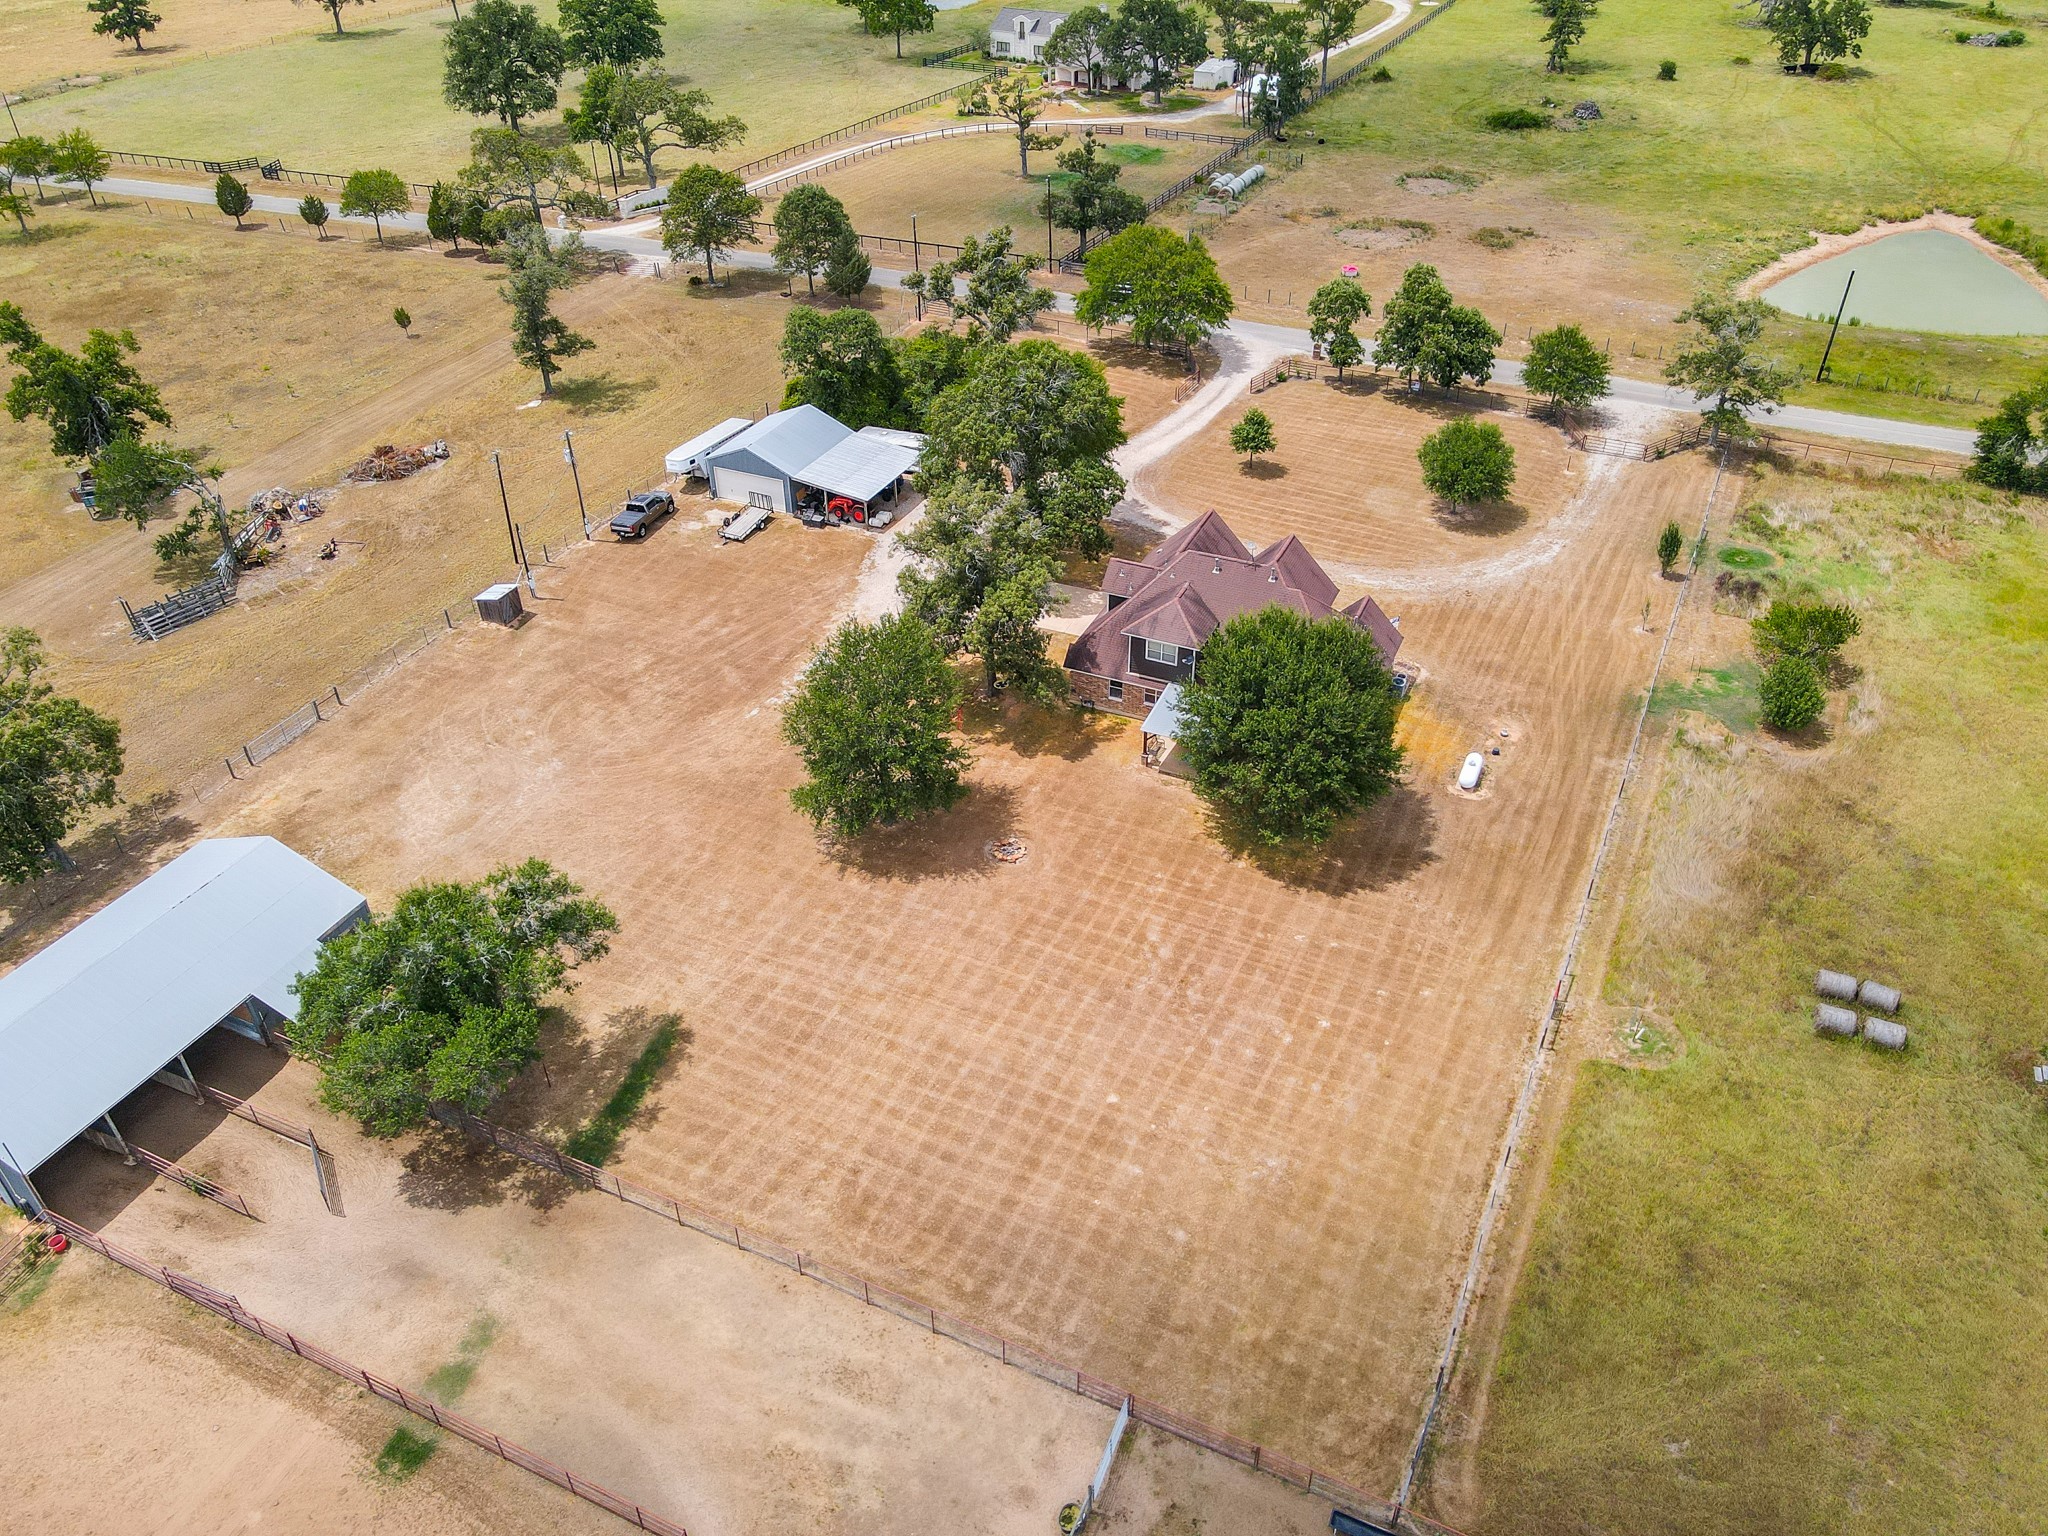 Gorgeous almost 25-ACRE+- Cross-Fenced Equestrian Estate is Move-In Ready. Surrounded by Large Ranches on a Peaceful Cul-de-Sac Street. Complete w/ a 40x60 Barn w/Living Quarters (Kitchen, Bedroom, Full Bath & W&D Hook-ups), 3-Horse Stalls, Tack Room, 4-FFA/4-H Pen Stalls, Loft Storage, Riding Arena, 2 RV/Trailer Hook-Ups w/Septic, Water & Electric, plus a 30x40 Storage/Workshop Bldg.